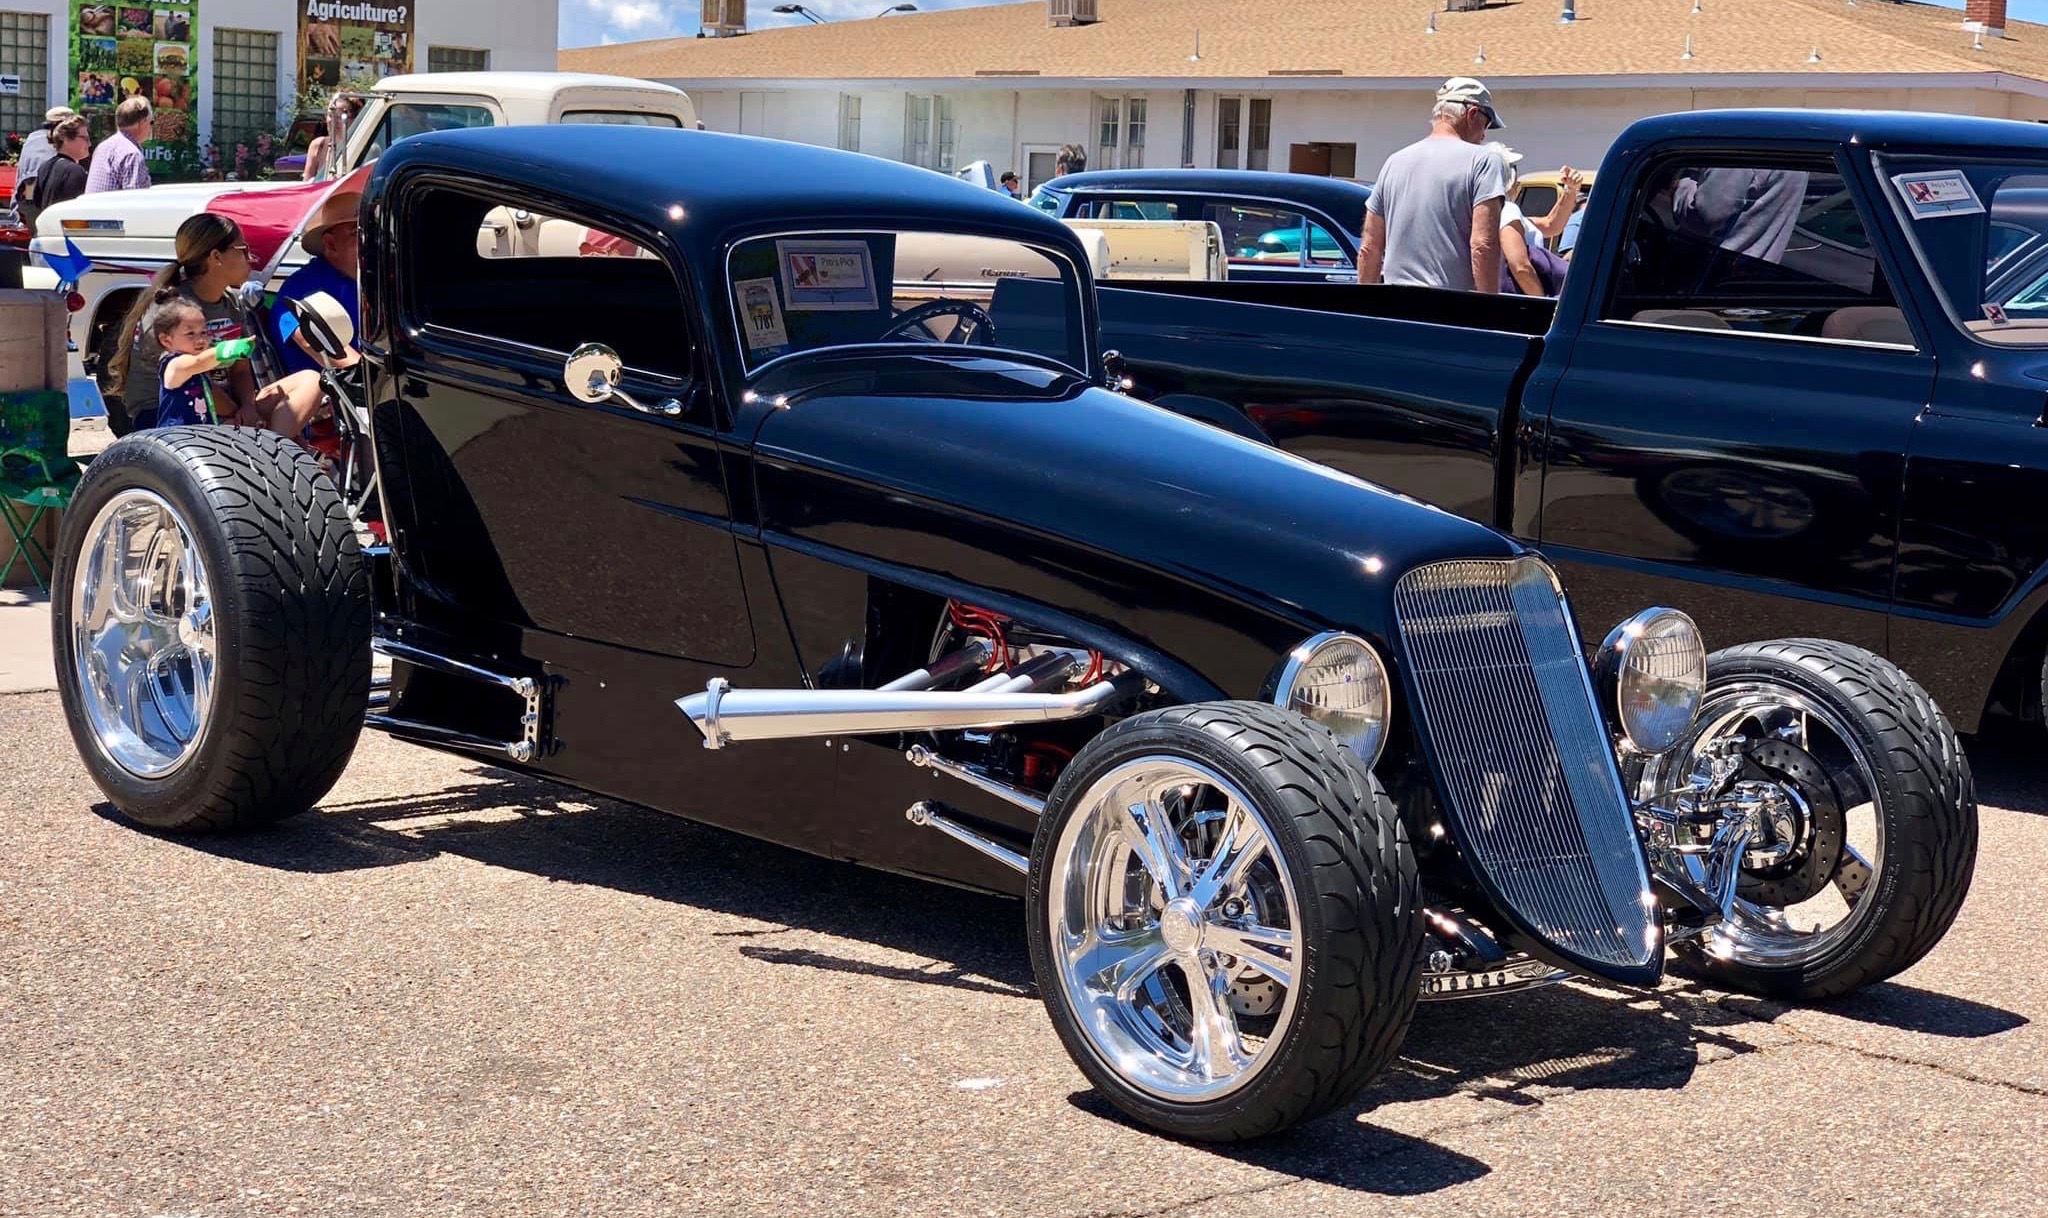 NSRA, NSRA proclaims winners at Rocky Mountain Nationals, ClassicCars.com Journal